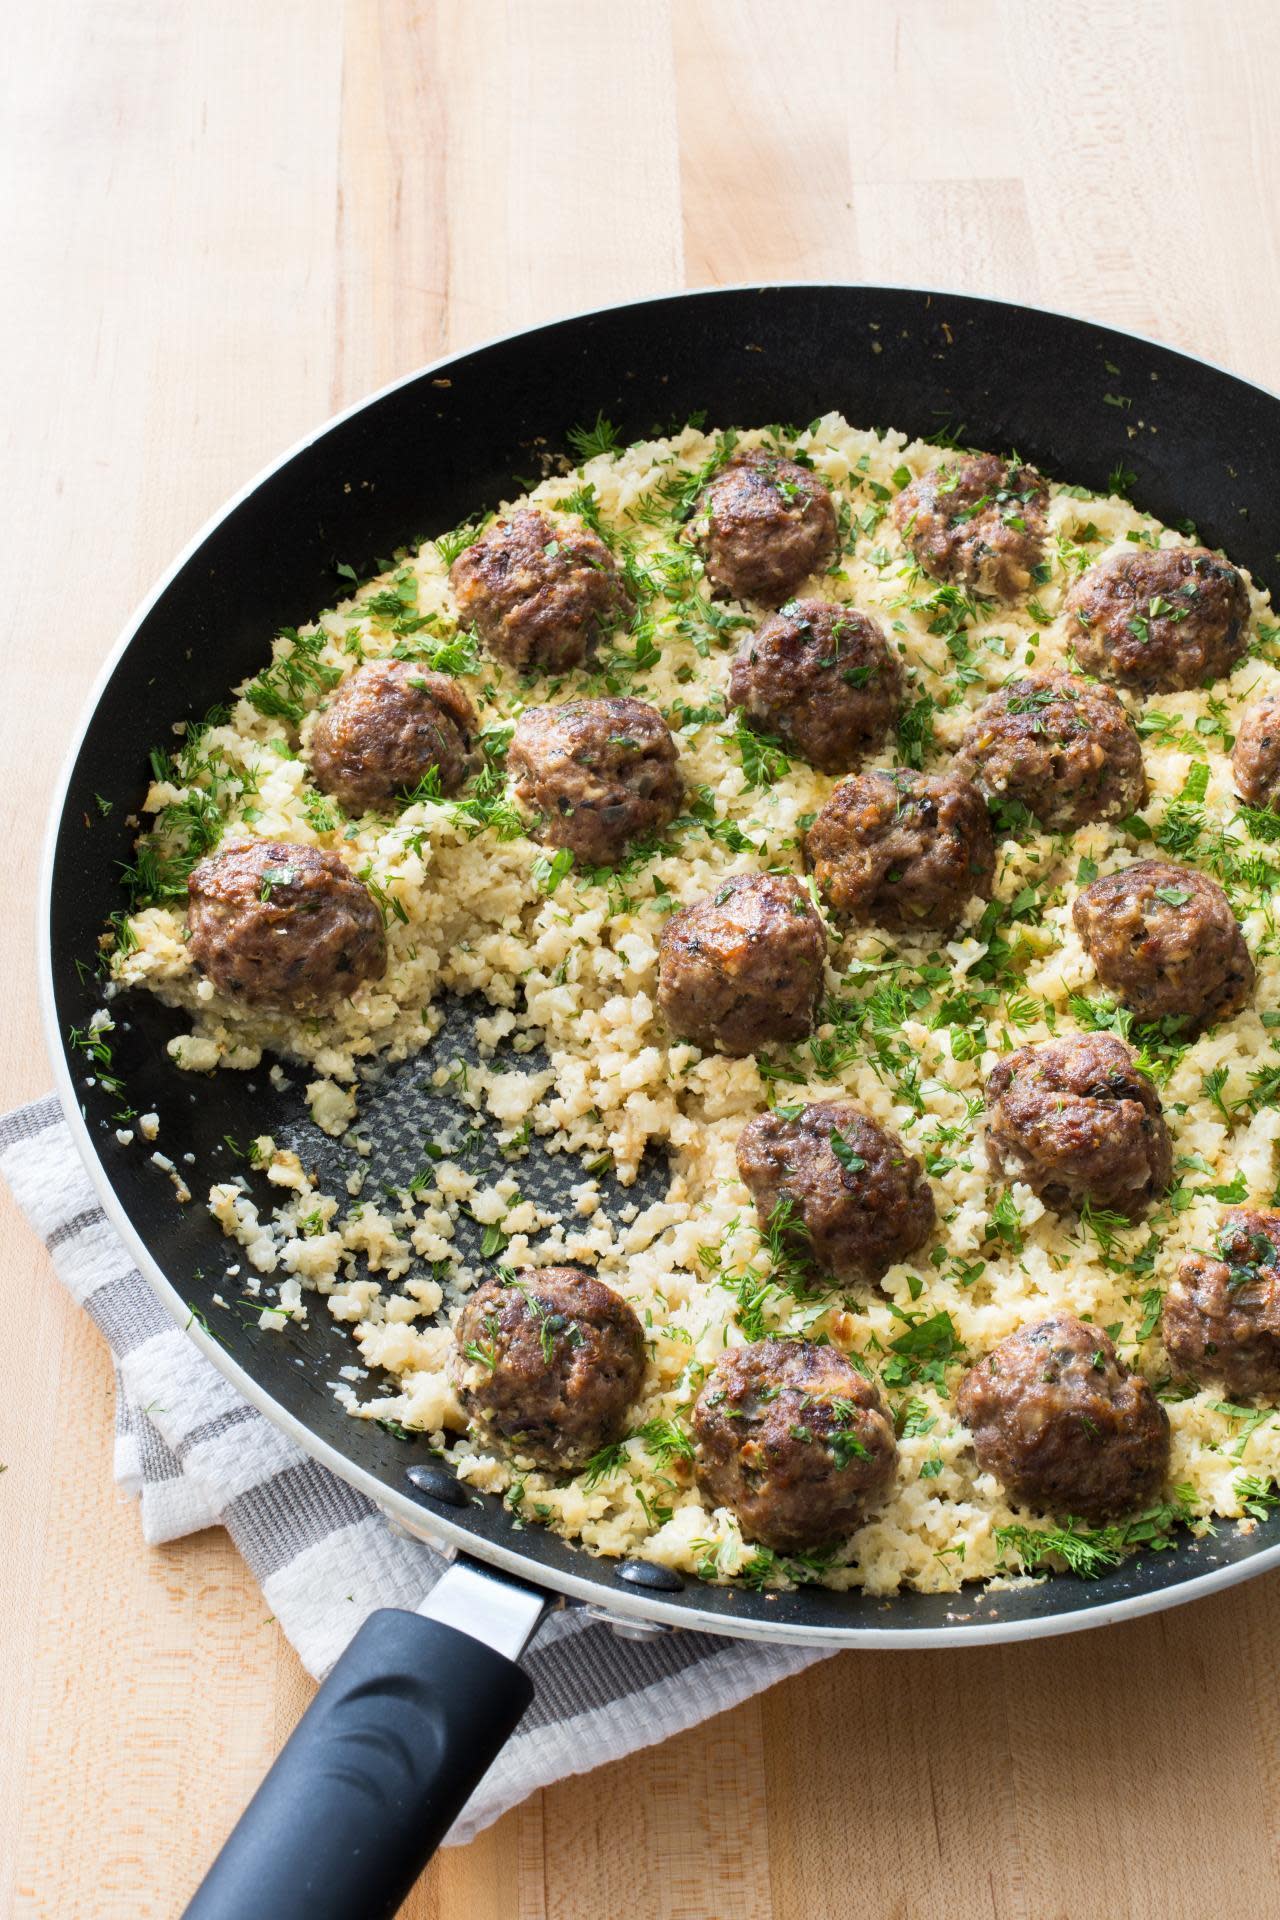 Greek Lamb Meatballs with Cauliflower Rice from ‘Paleo Perfected’